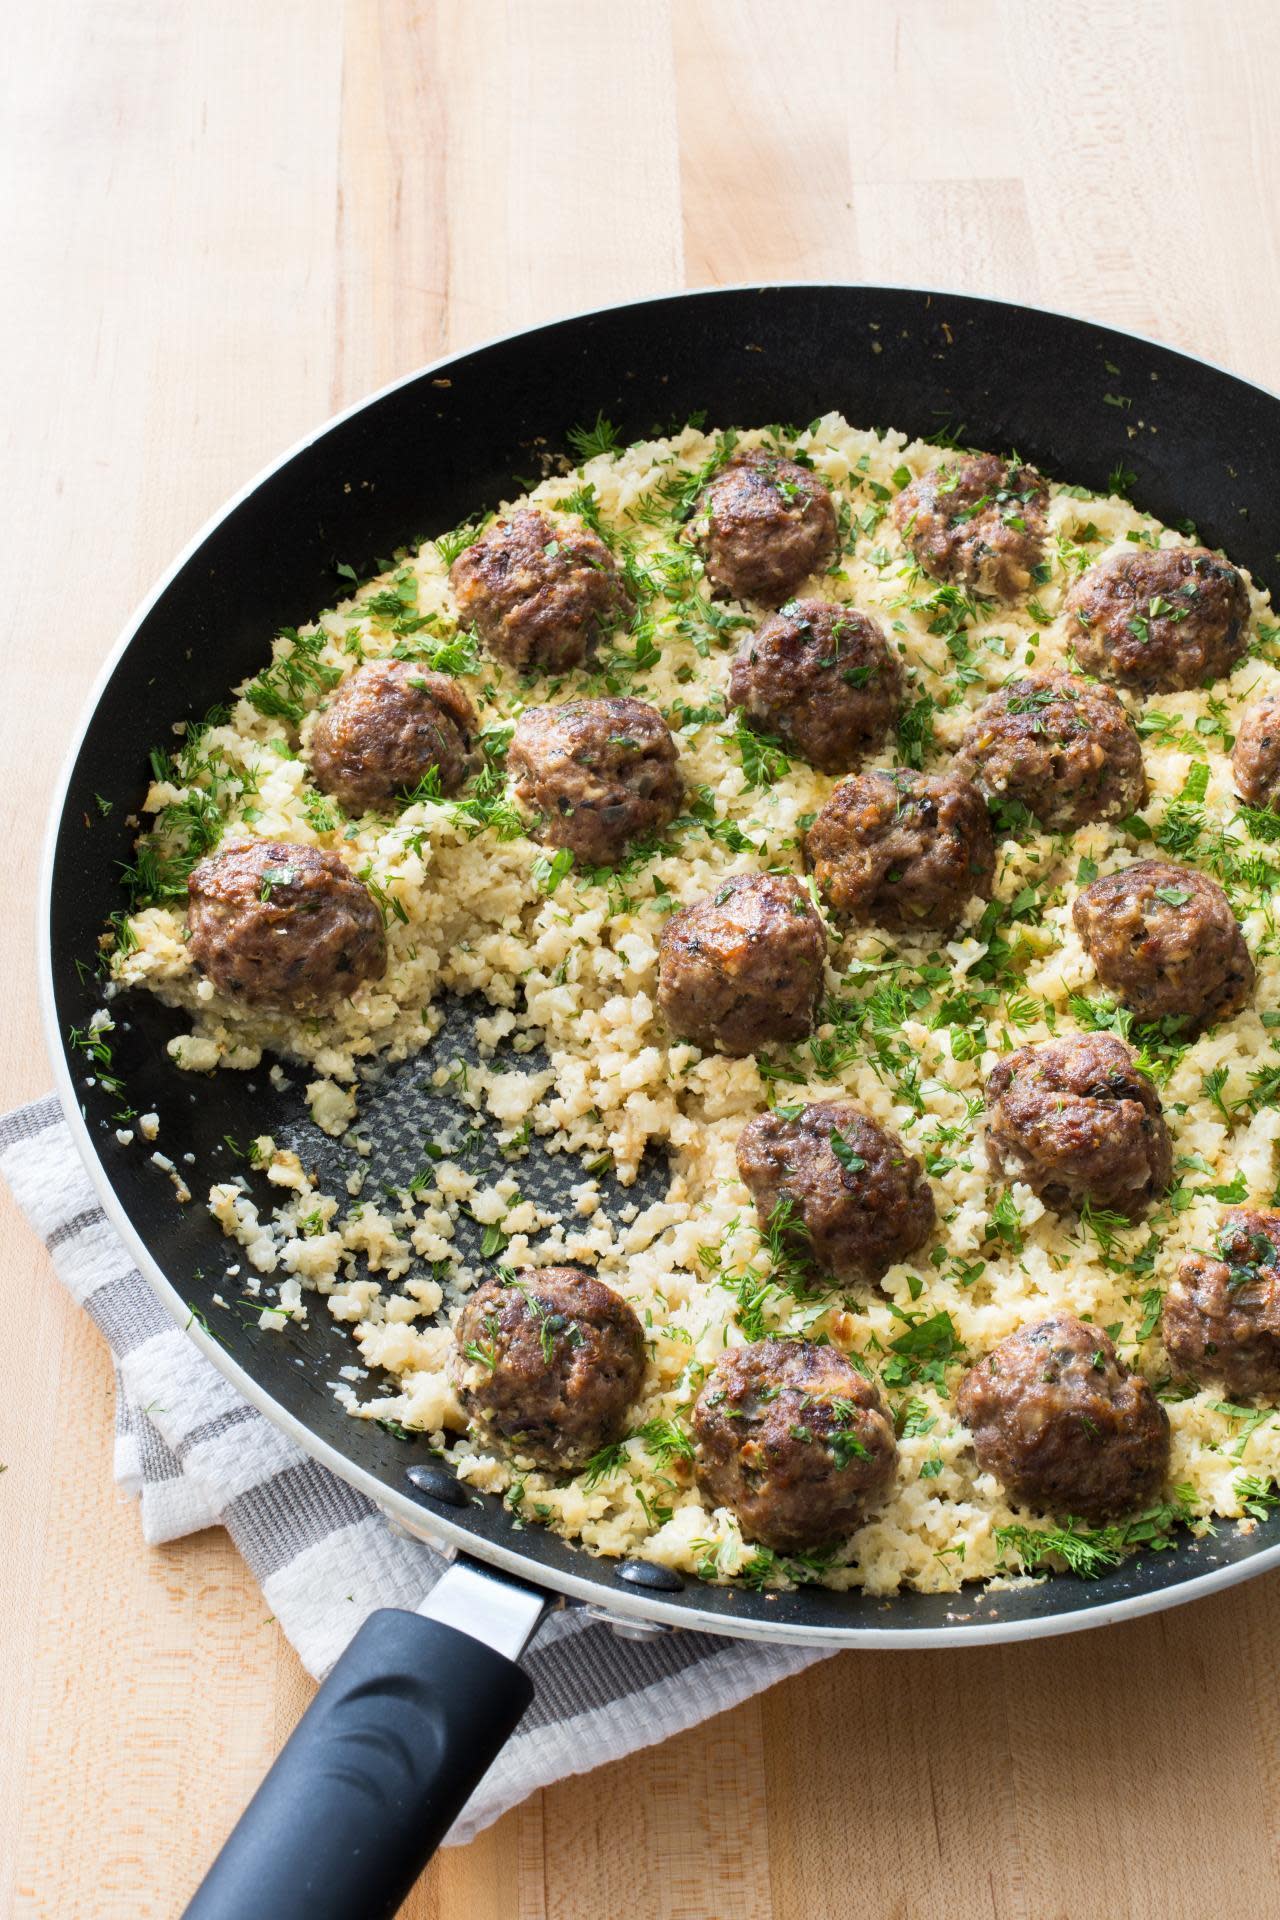 Greek Lamb Meatballs with Cauliflower Rice from ‘Paleo Perfected’